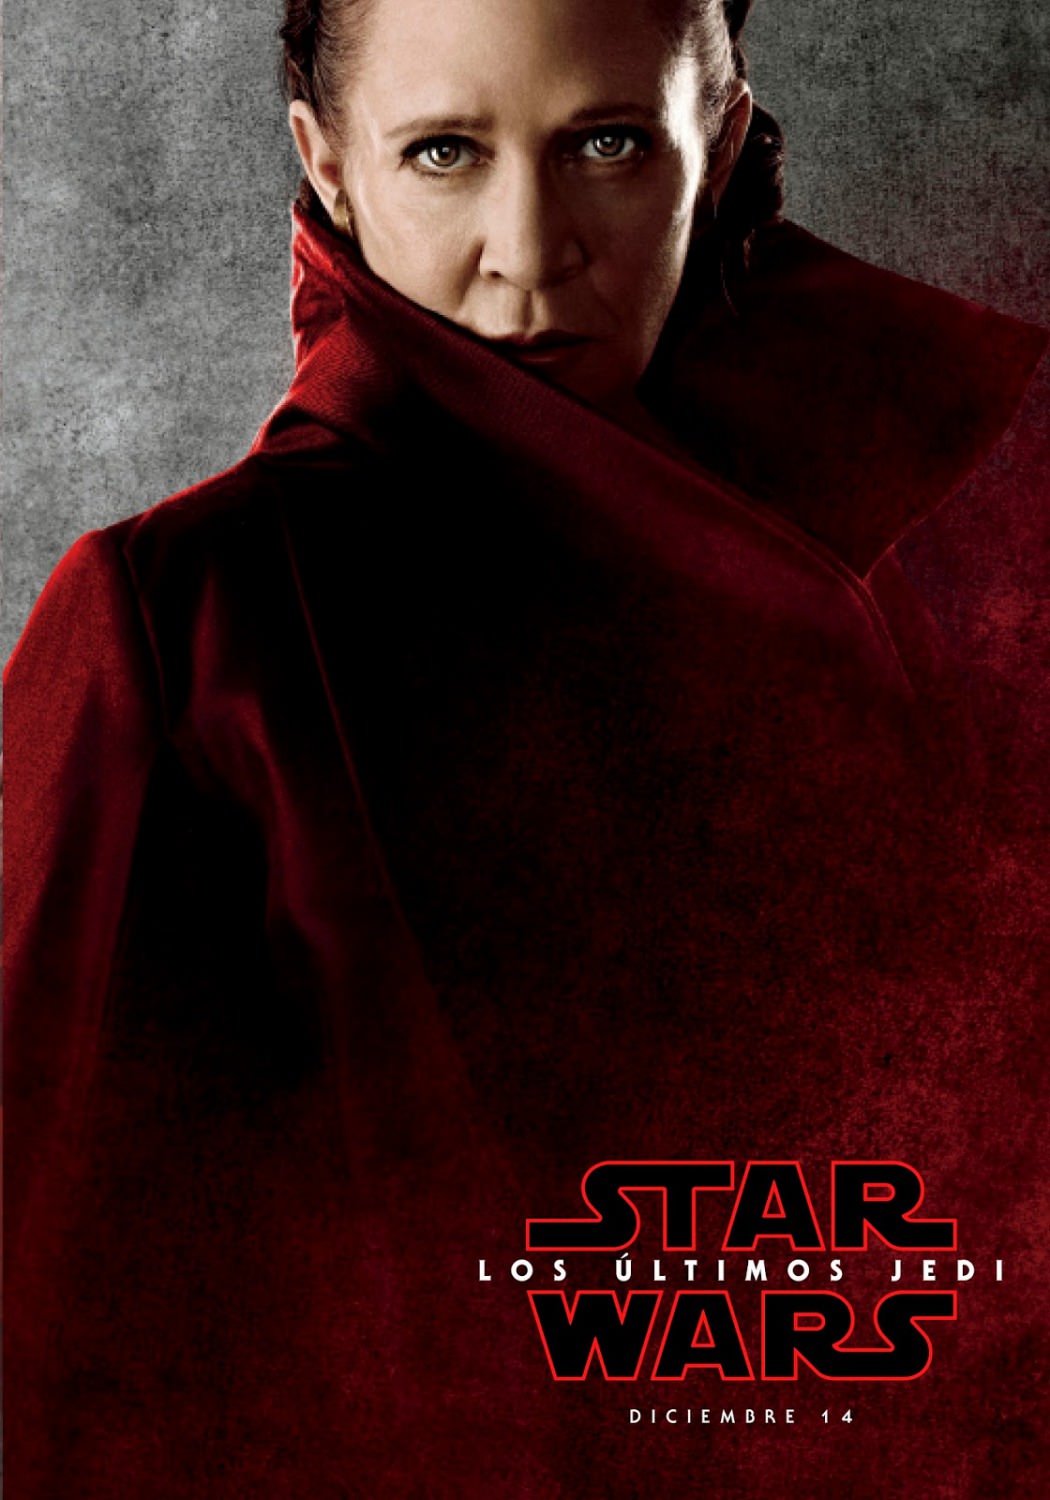 Star Wars The Last Jedi character POsters